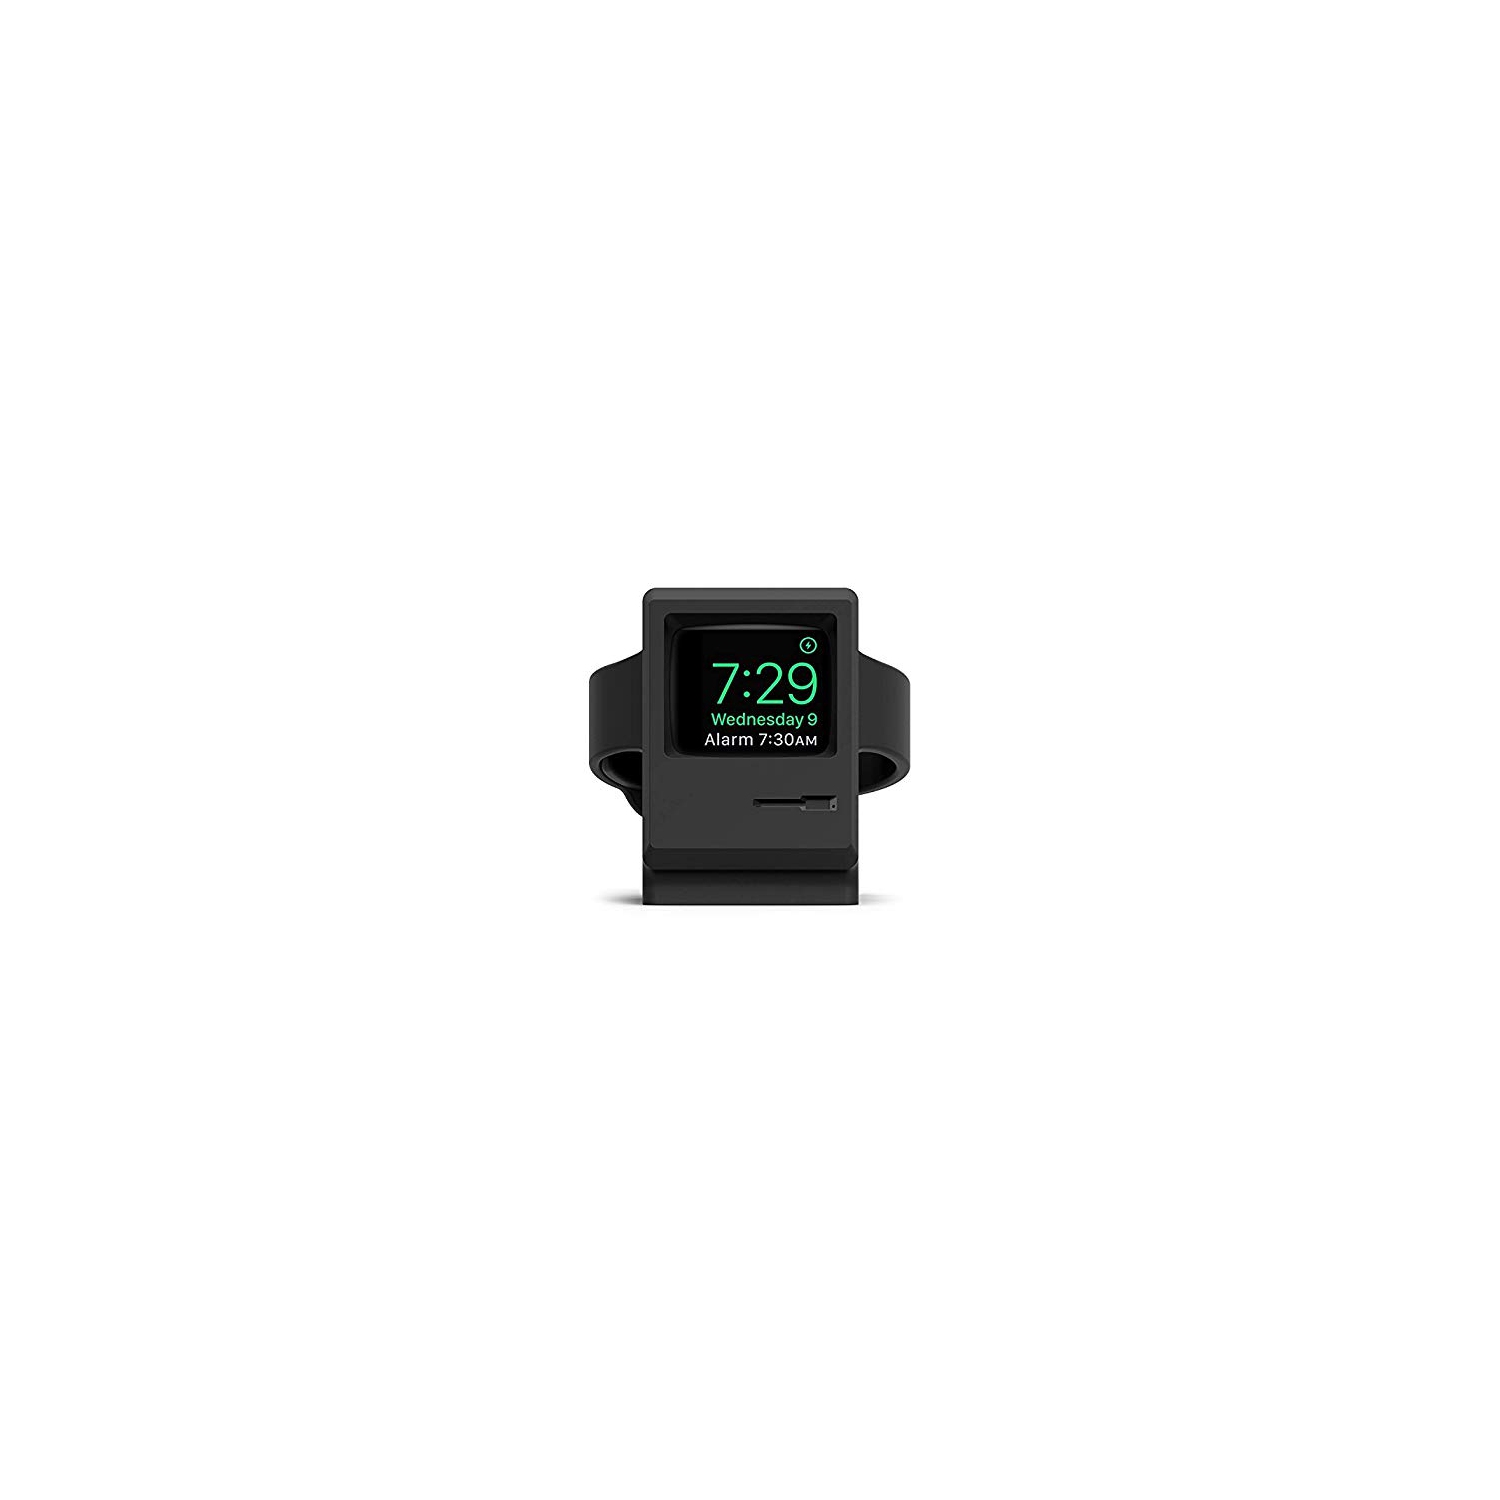 elago W3 Stand for Apple Watch Series 4 (40mm) Series 3 Series 2 Series 1 42mm 40mm 38mm [Nightstand Mode][Origina